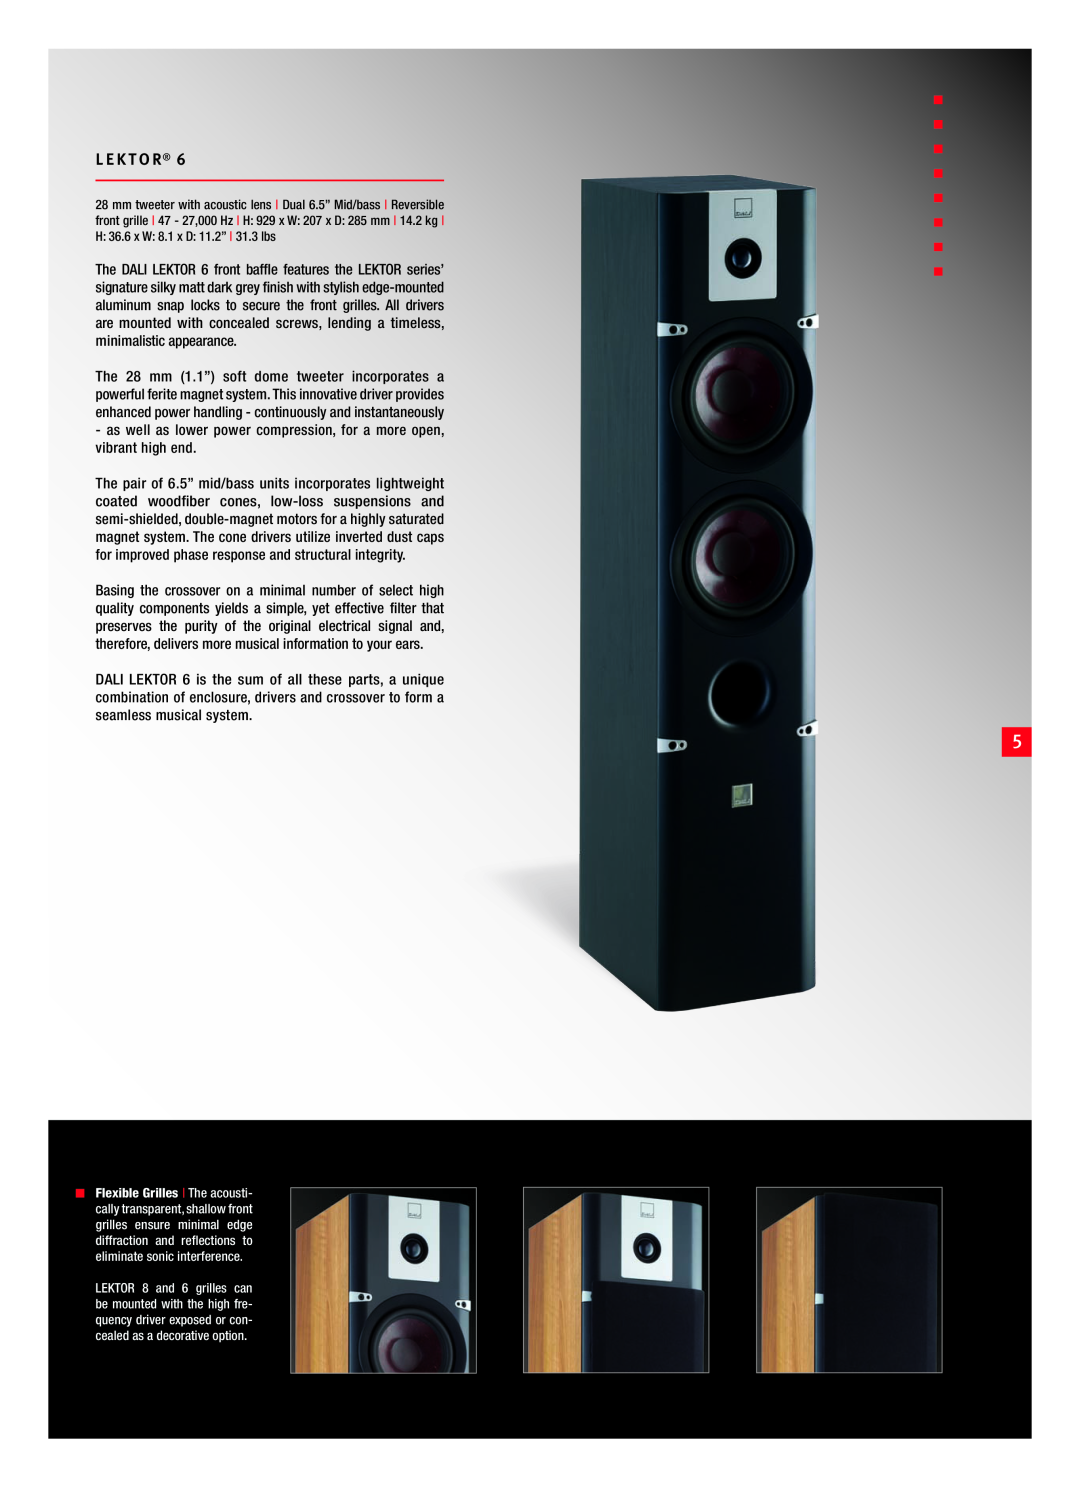 DALI Loudspeakers Lektor manual L E K T O R, as well as lower power compression, for a more open, vibrant high end 